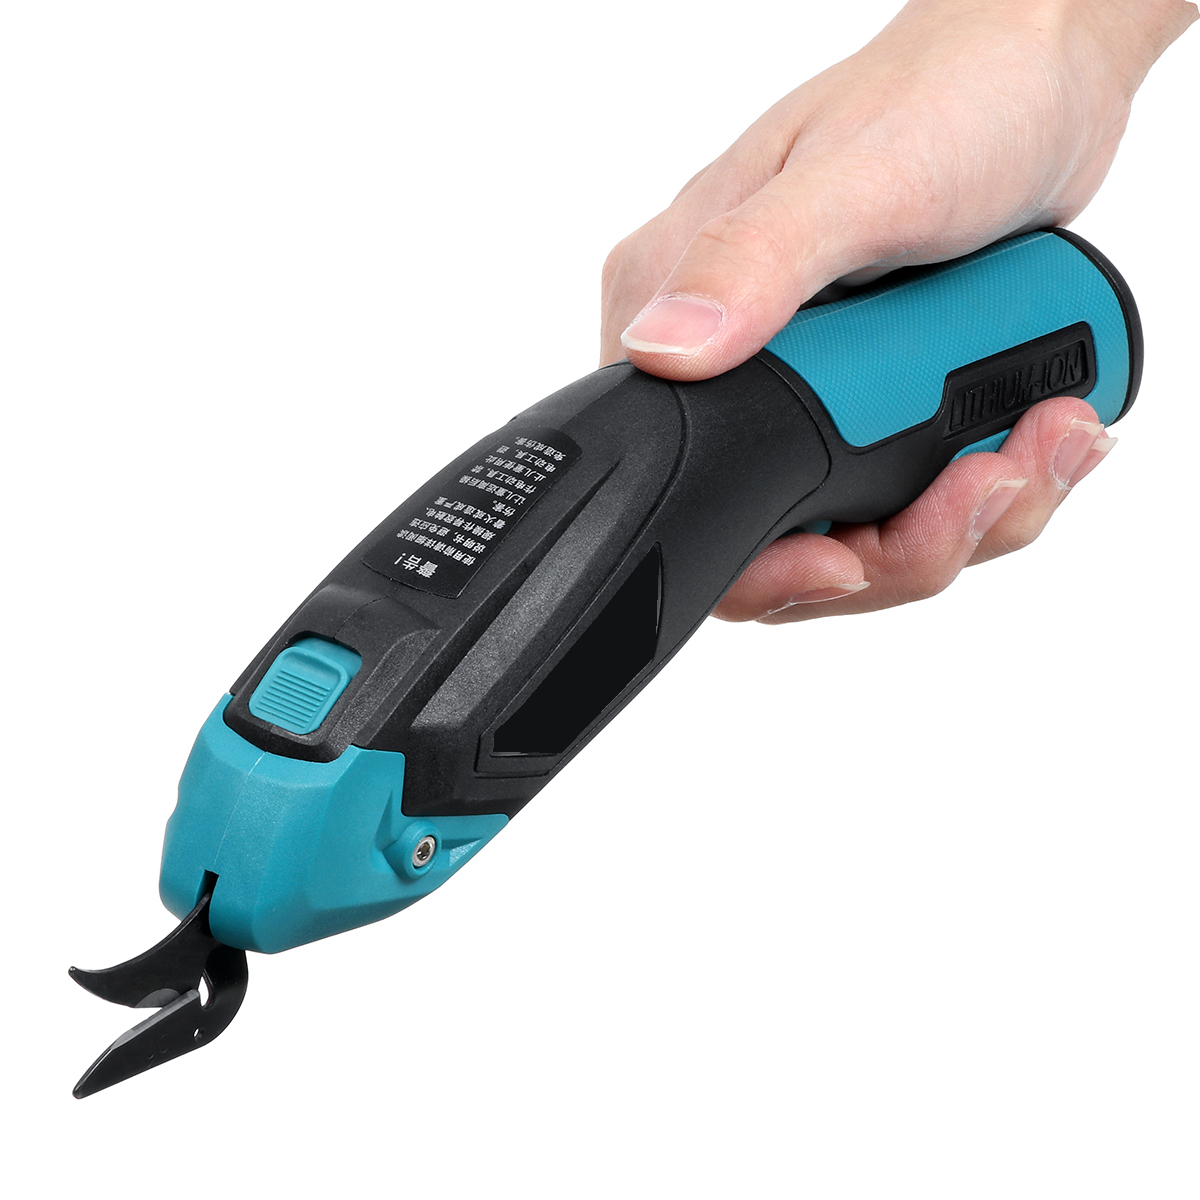 DC-4V-Portable-Cordless-Electric-Scissors-Leather-Fabric-Crafts-Cutter-Cutting-Tool-1733406-7